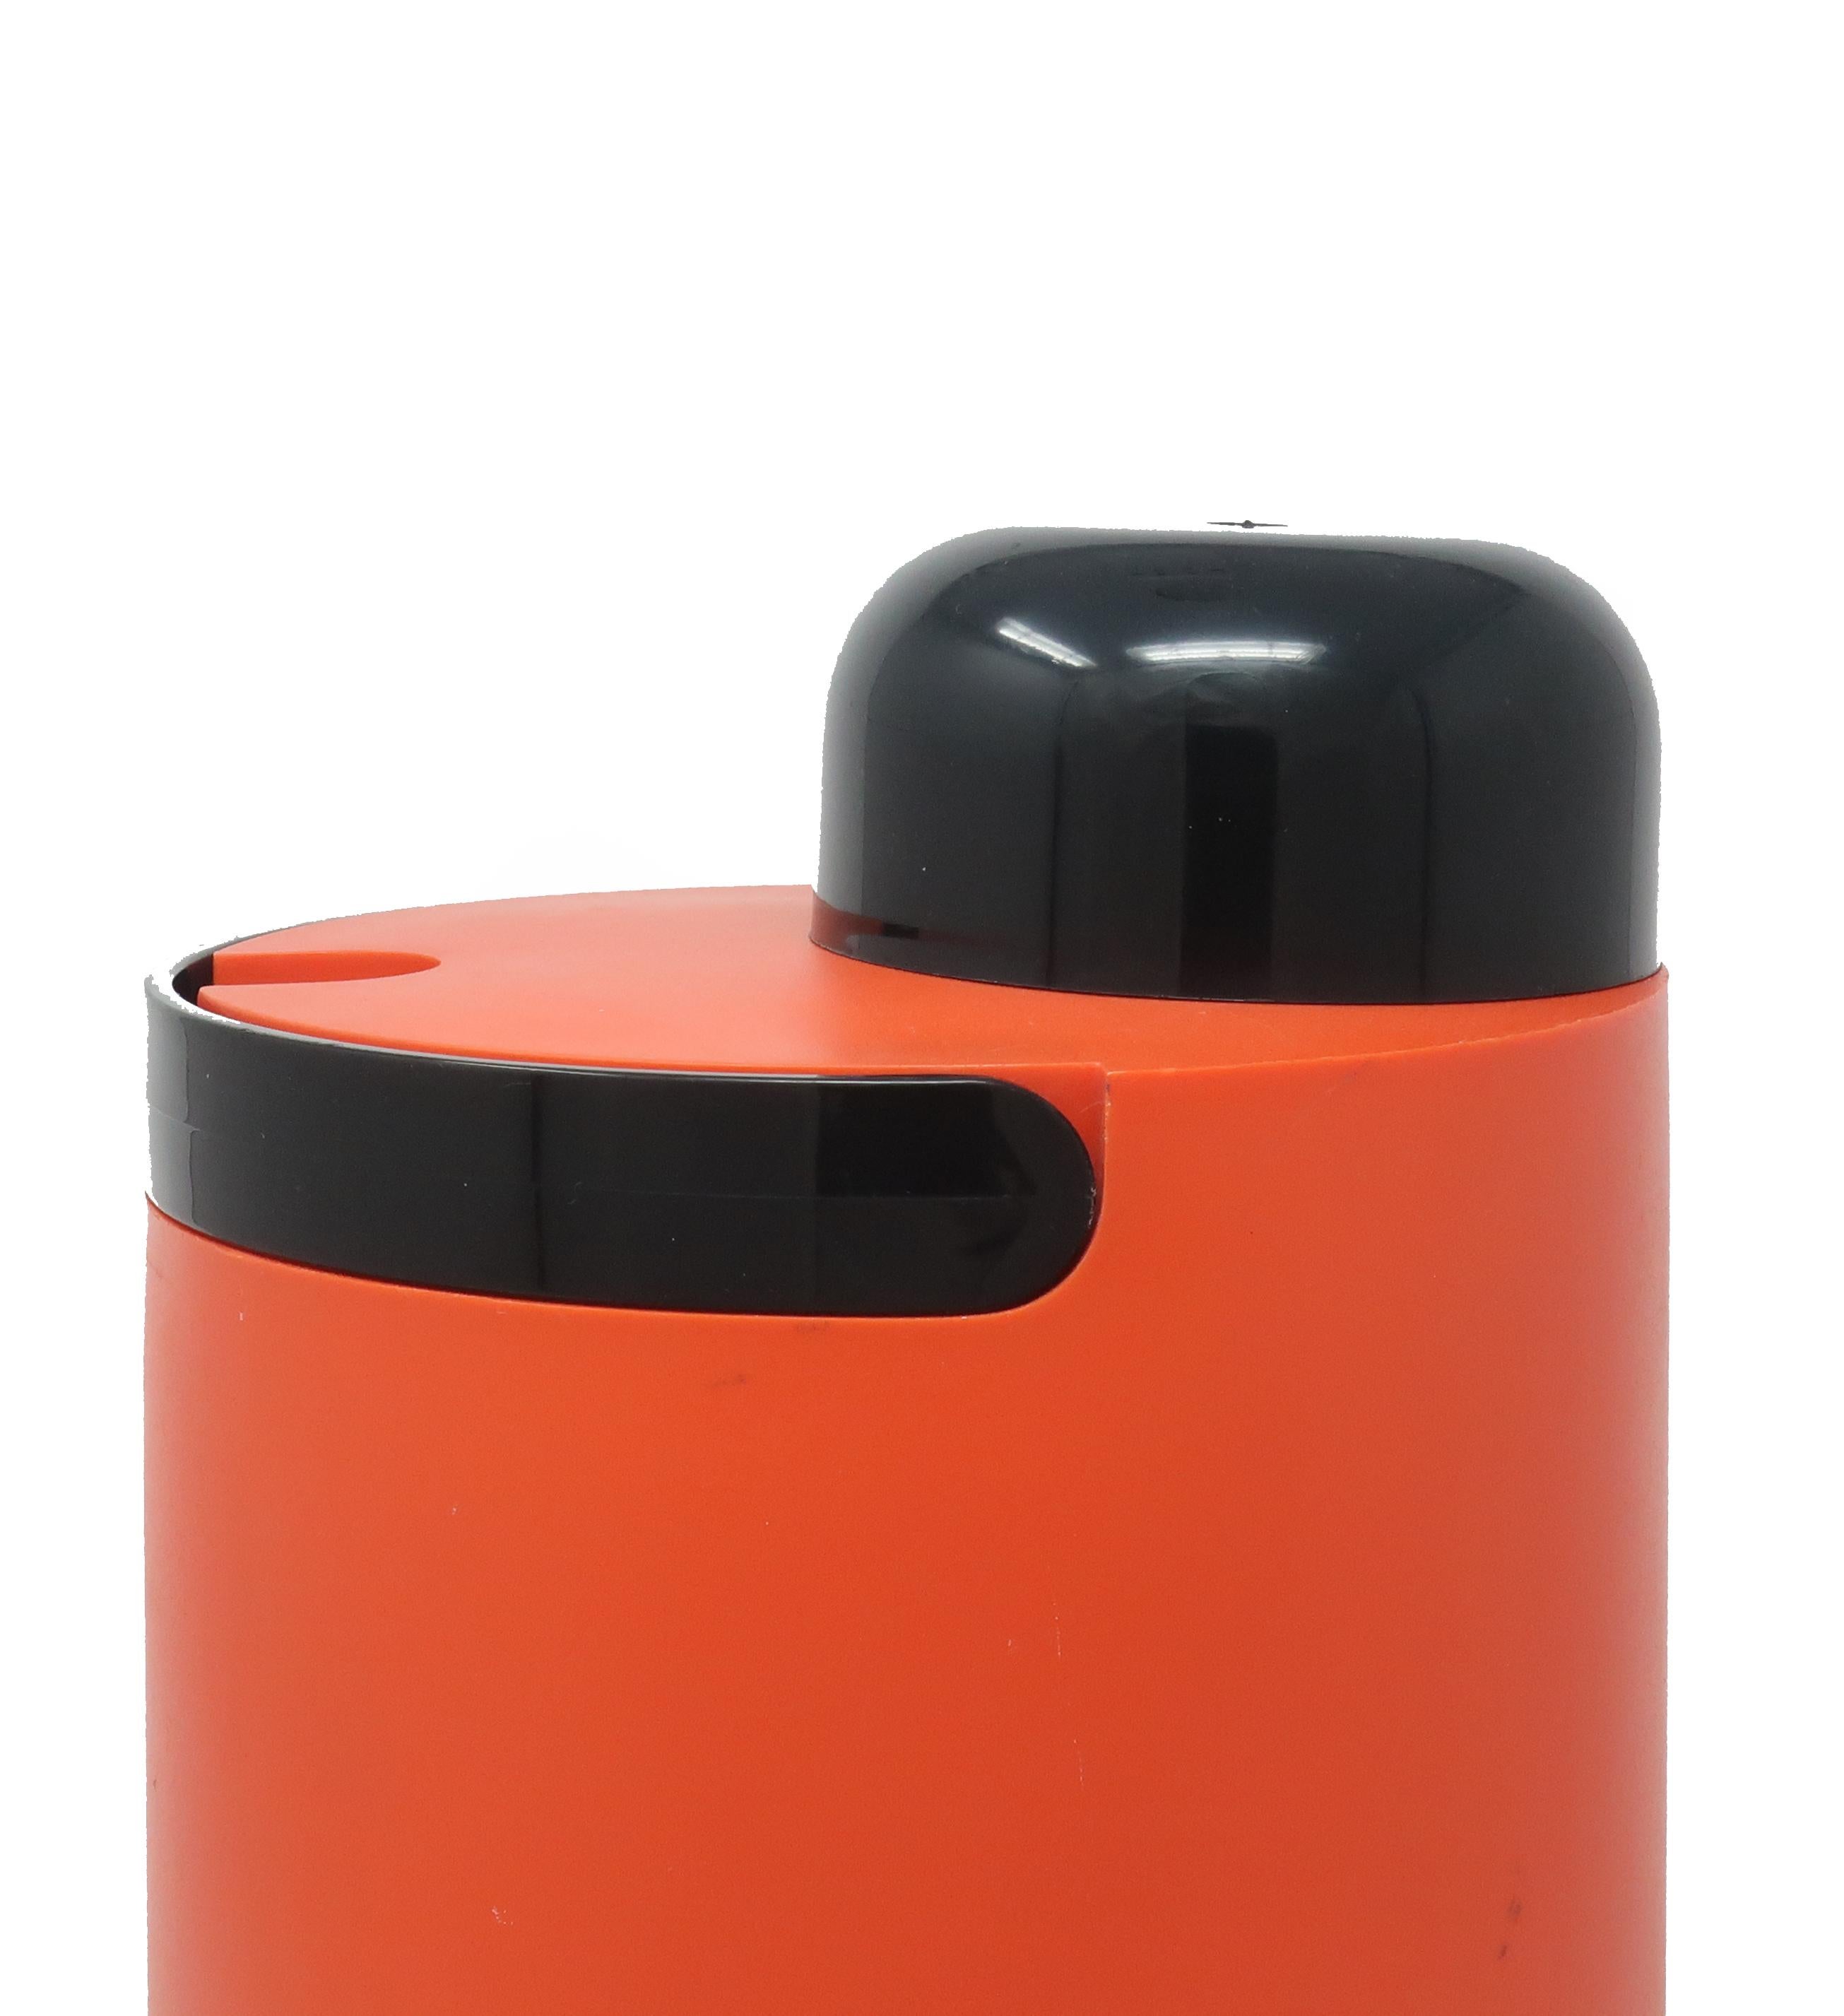 An unusual piece from Heller’s midcentury output of amazing plastic products! This thermal jug/cooler has an orange plastic body, black removable cup and pour spout, black folding handle, and clear plastic liner to keep liquids cold or hot. The pour